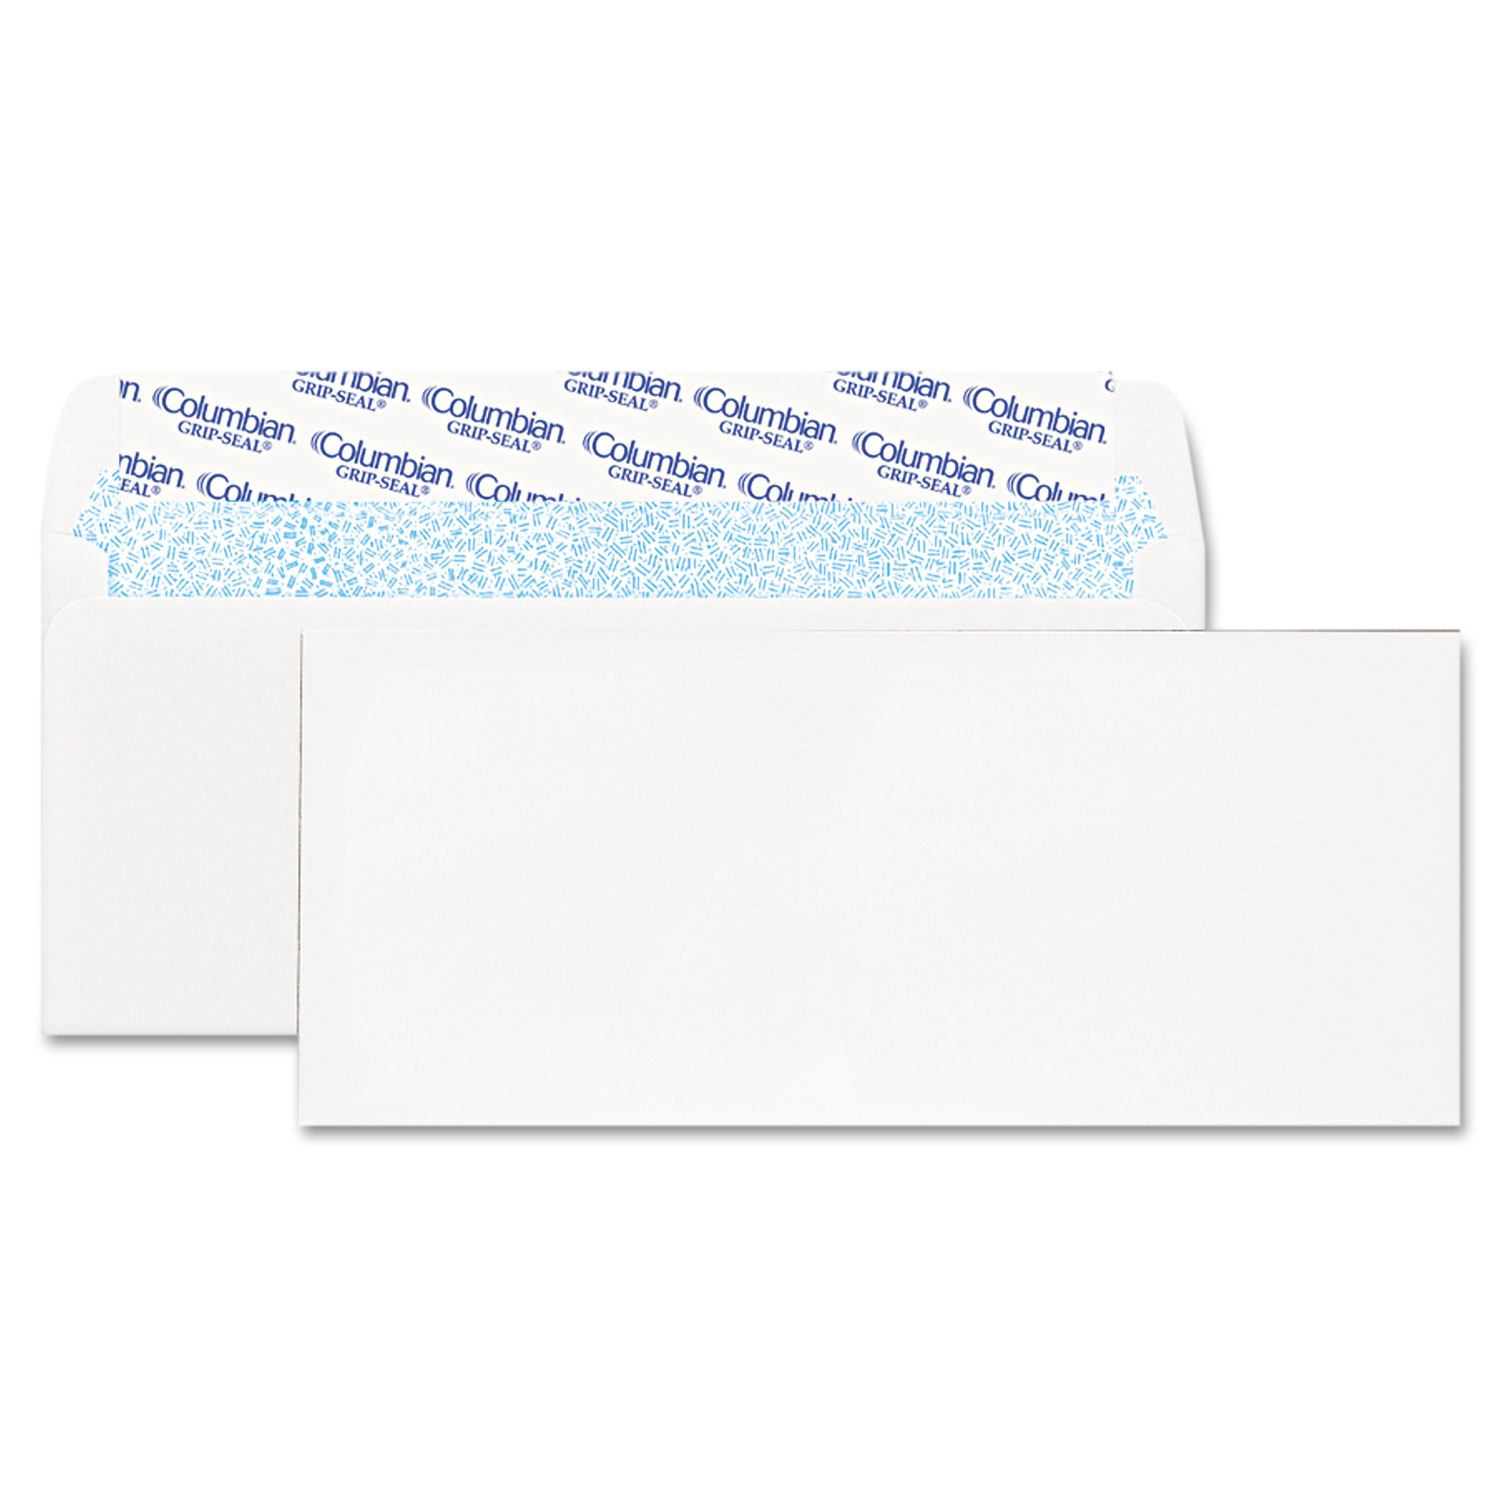  Columbian COLO148 Grip-Seal Business Envelope, #10, Commercial Flap, Self-Adhesive Closure, 4.13 x 9.5, White, 250/Box (QUACO148) 